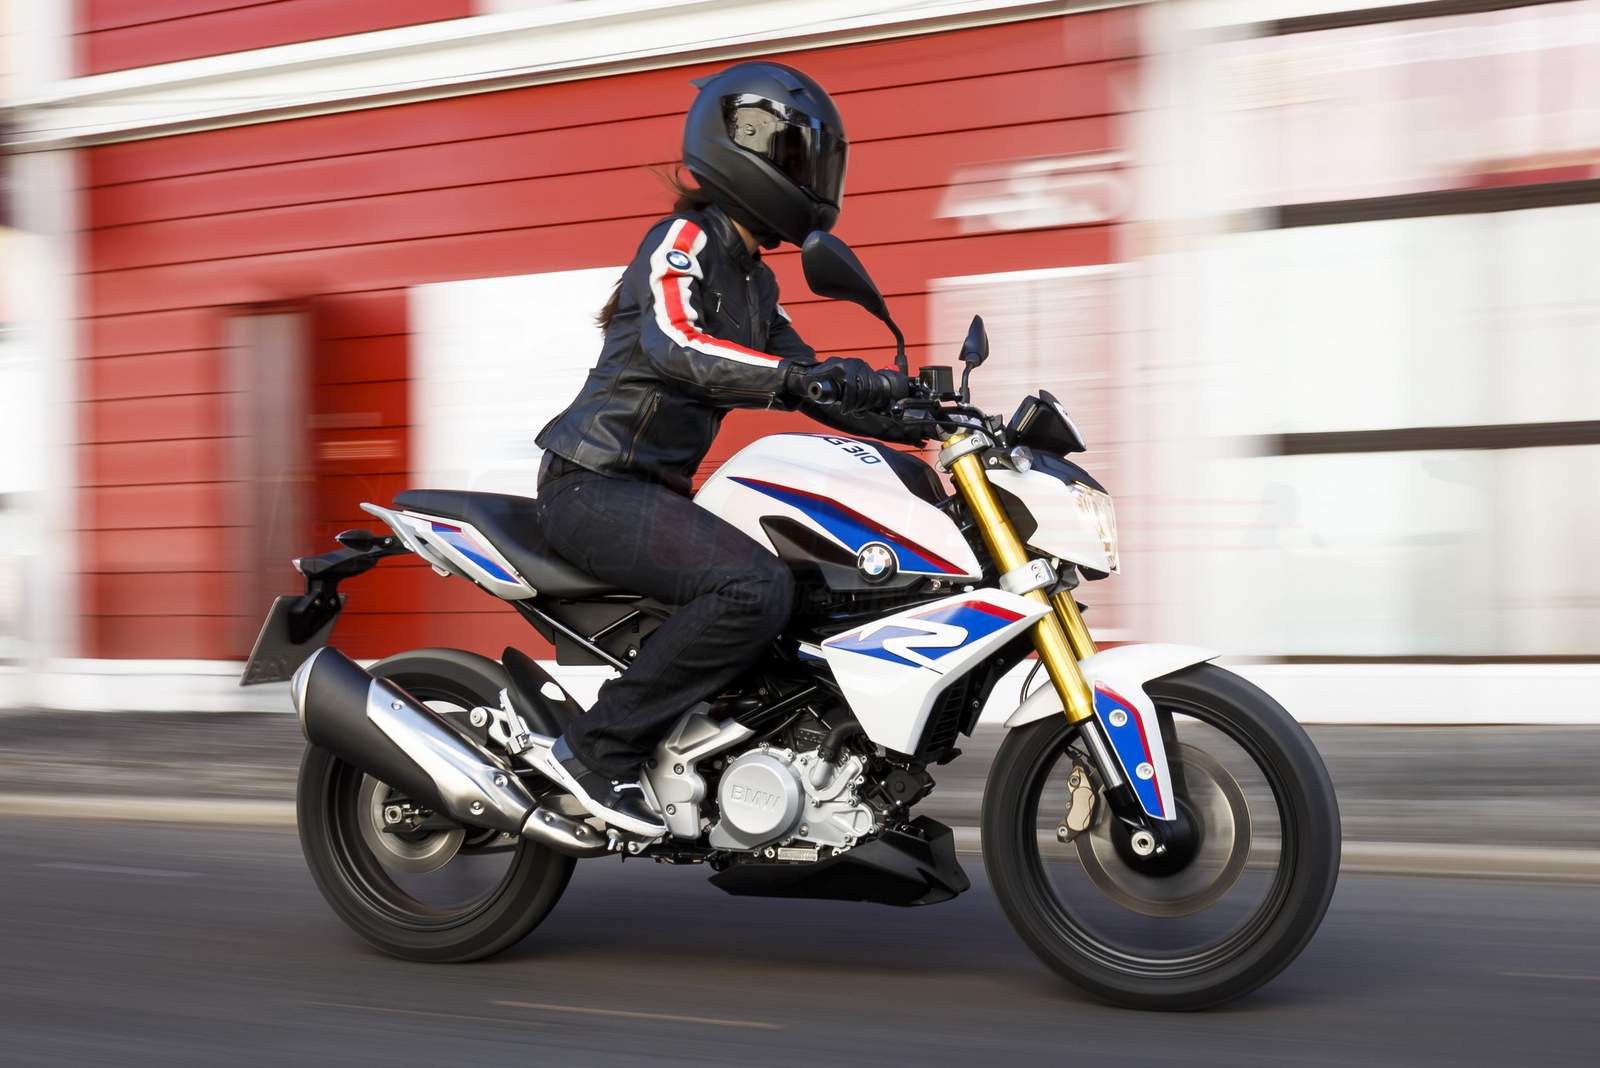 BMW G 310 R Revealed | DriveMag Riders